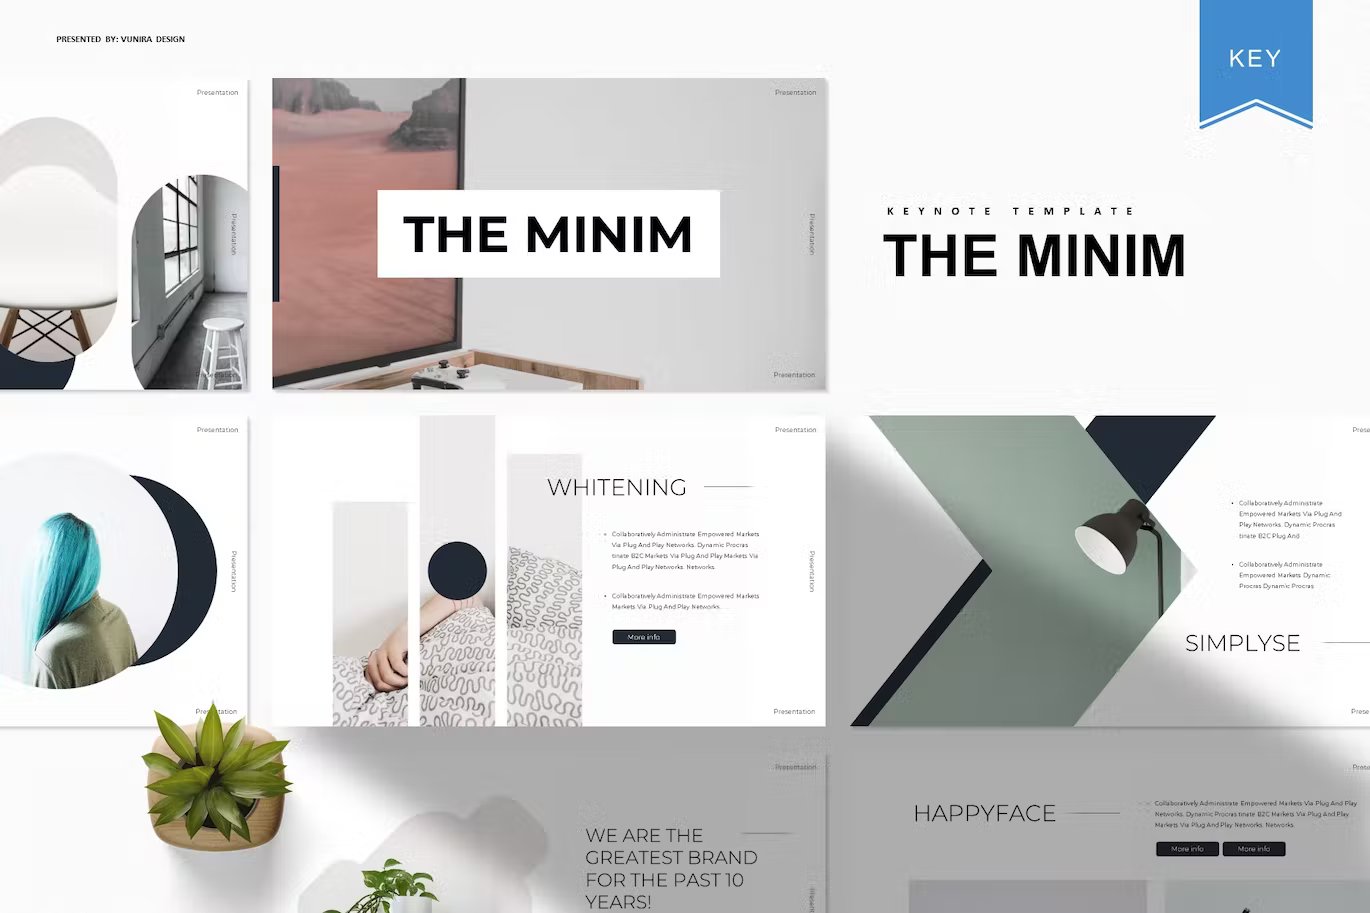 Black lettering "The Minim Keynote Template" and different templates on a gray background.